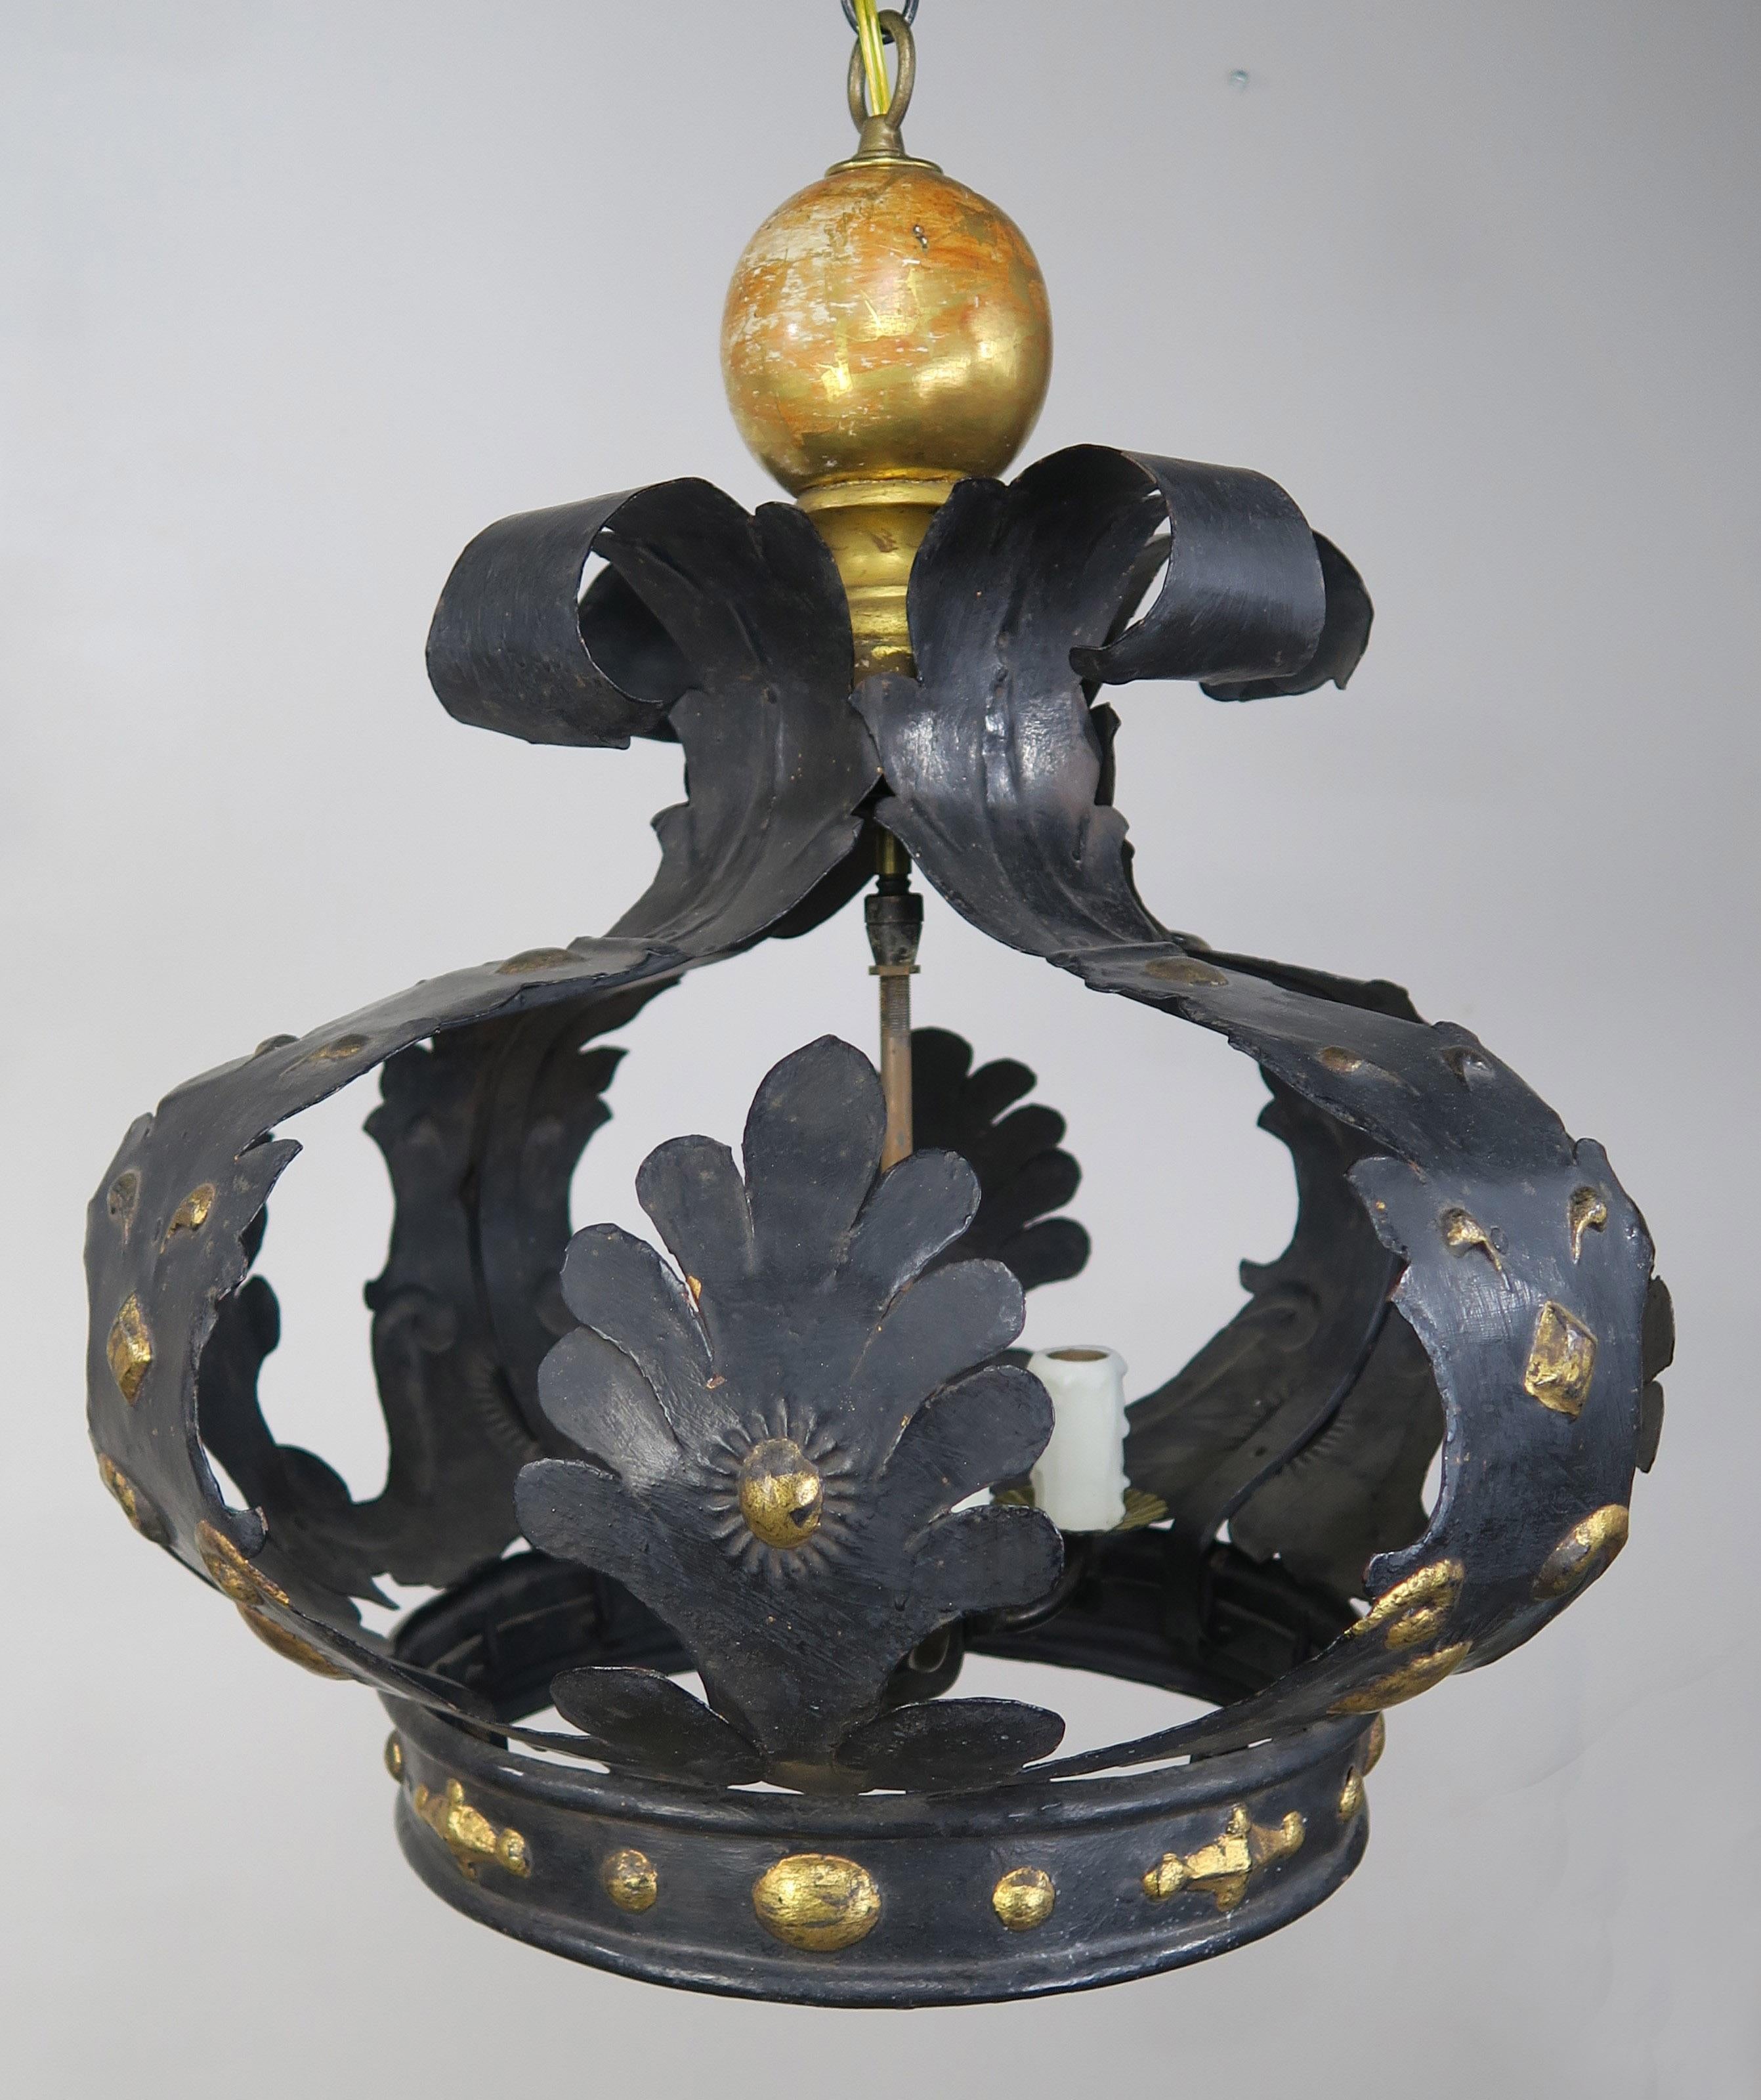 Italian 4-light tole and wood crown chandelier with gold accents throughout. The fixture was originally made for a bed canopy and still has the hooks where the fabric hung over the bed. The crown is now wired into a light fixture with chain and